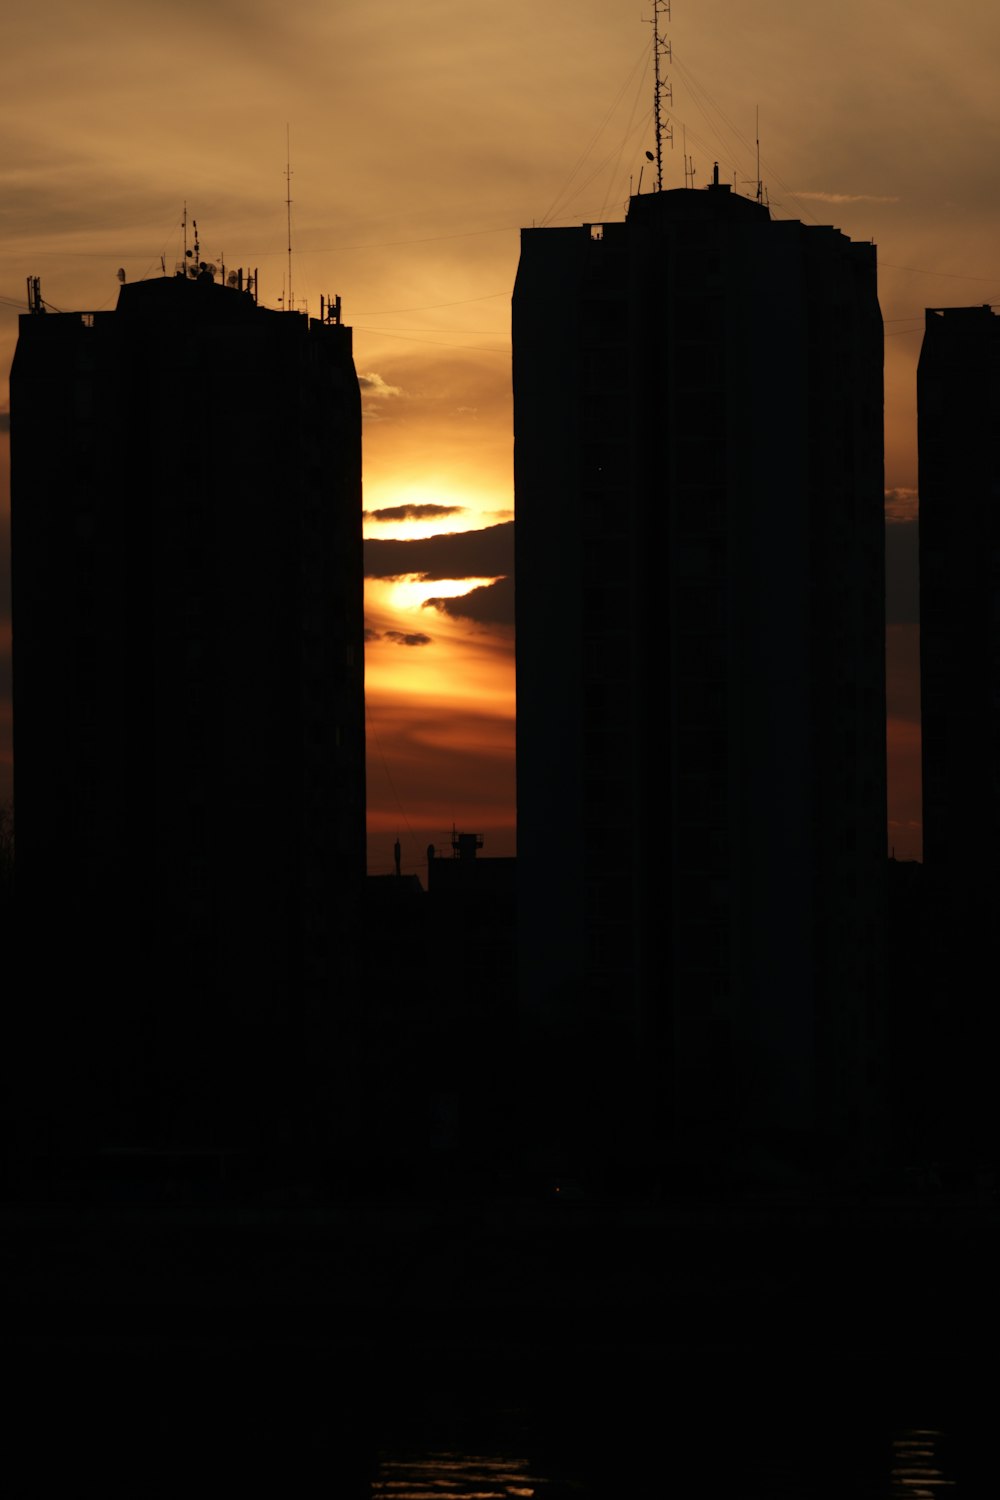 the sun is setting behind some tall buildings